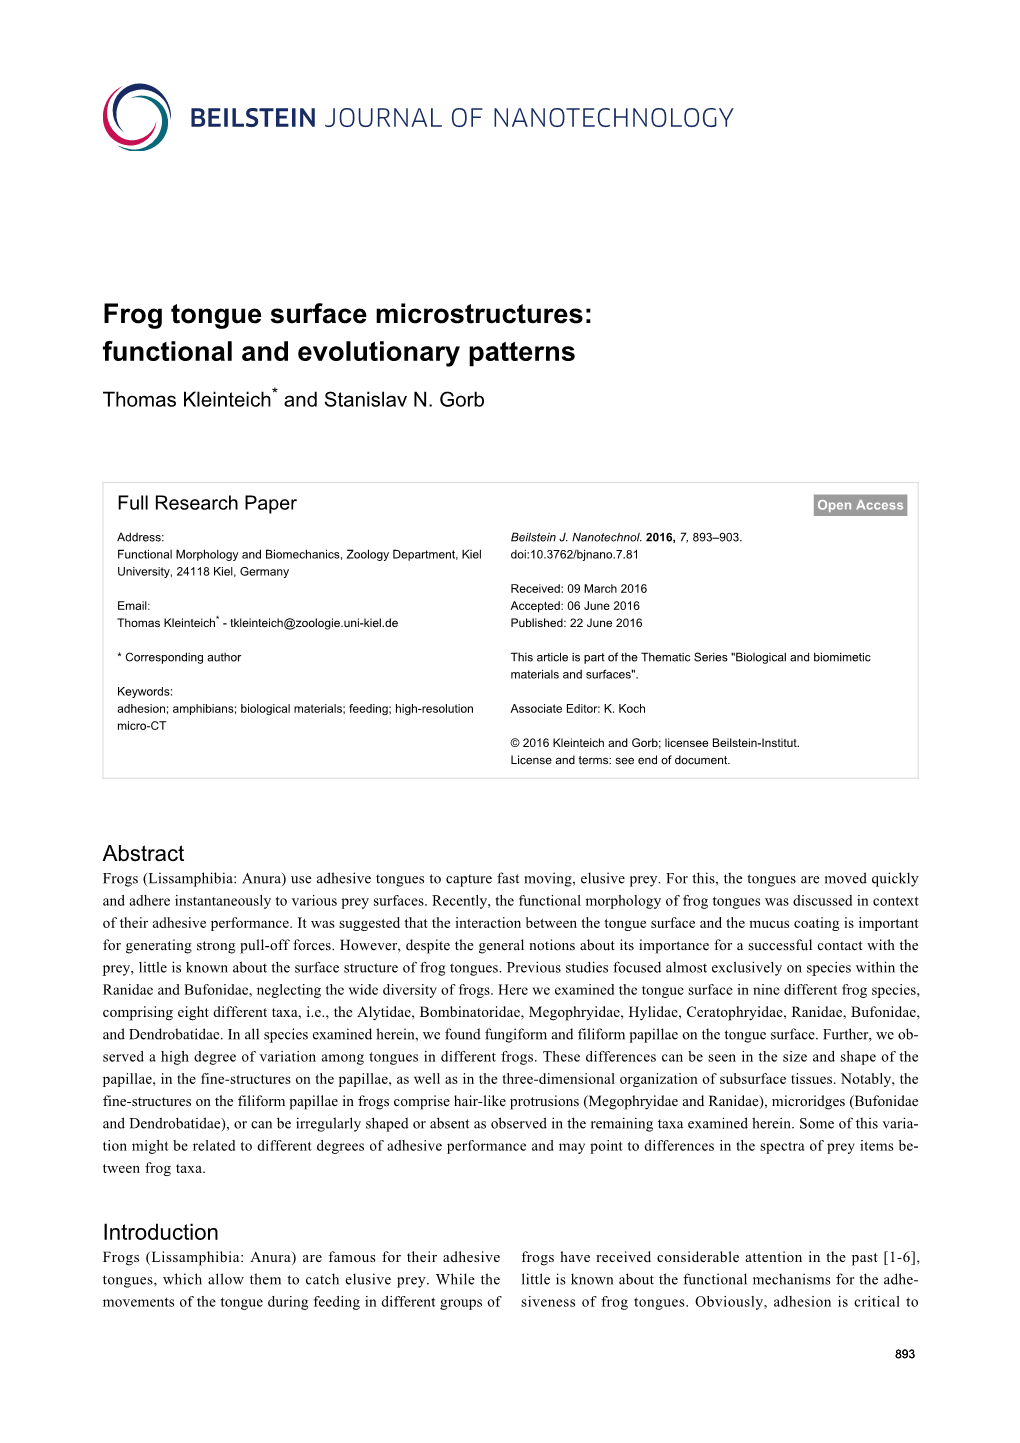 Frog Tongue Surface Microstructures: Functional and Evolutionary Patterns